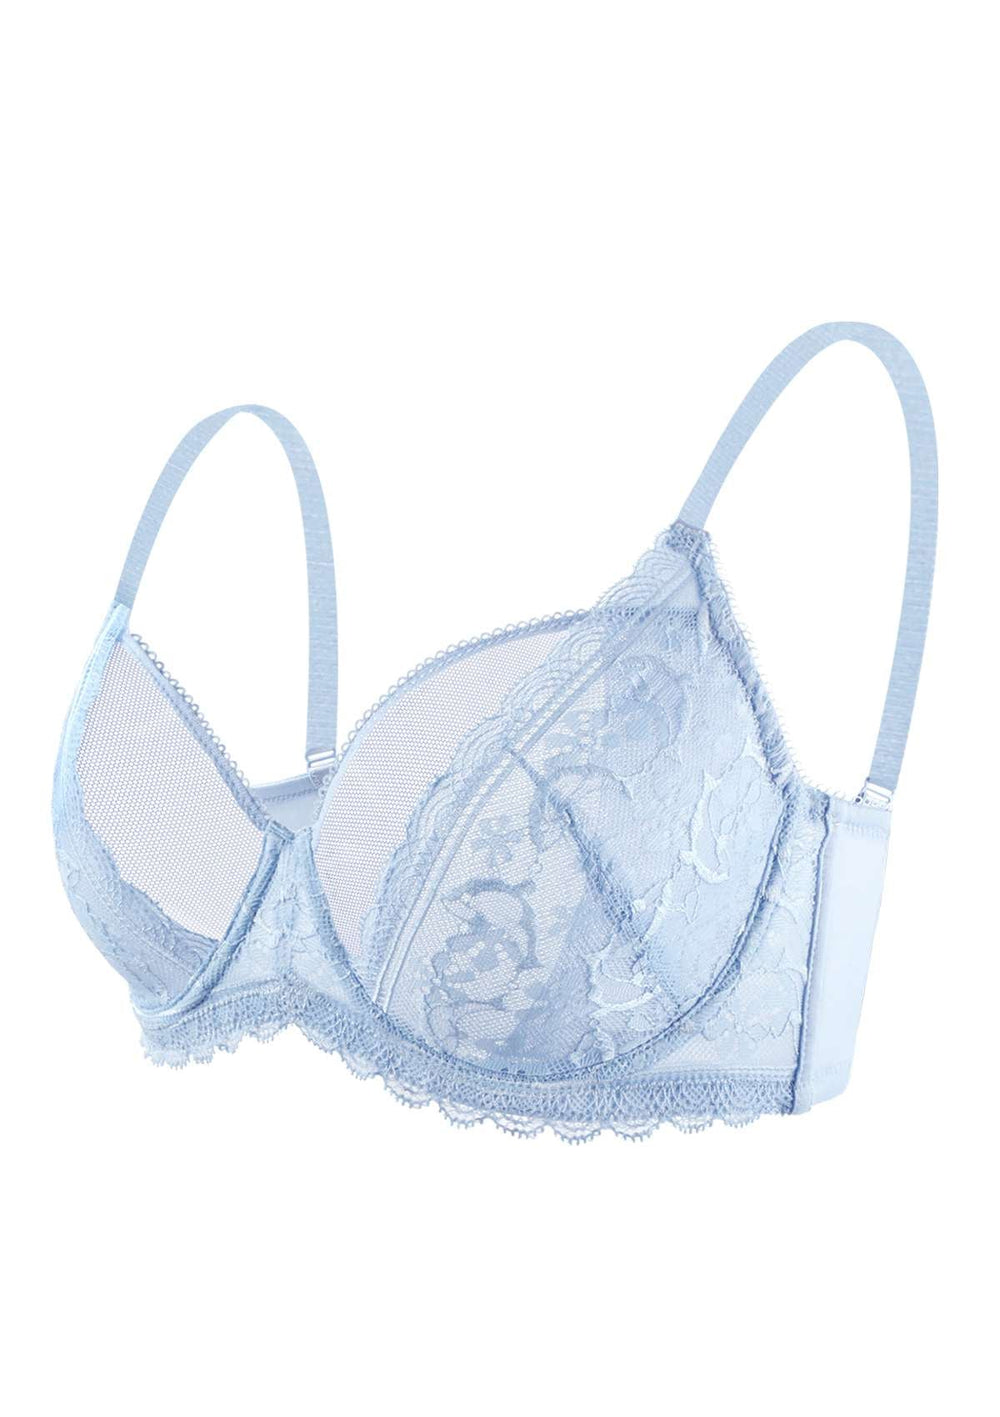 Viola's Secret Style 9292 Marbled Blue Underwire Padded Push-Up Bra 42D -  Helia Beer Co